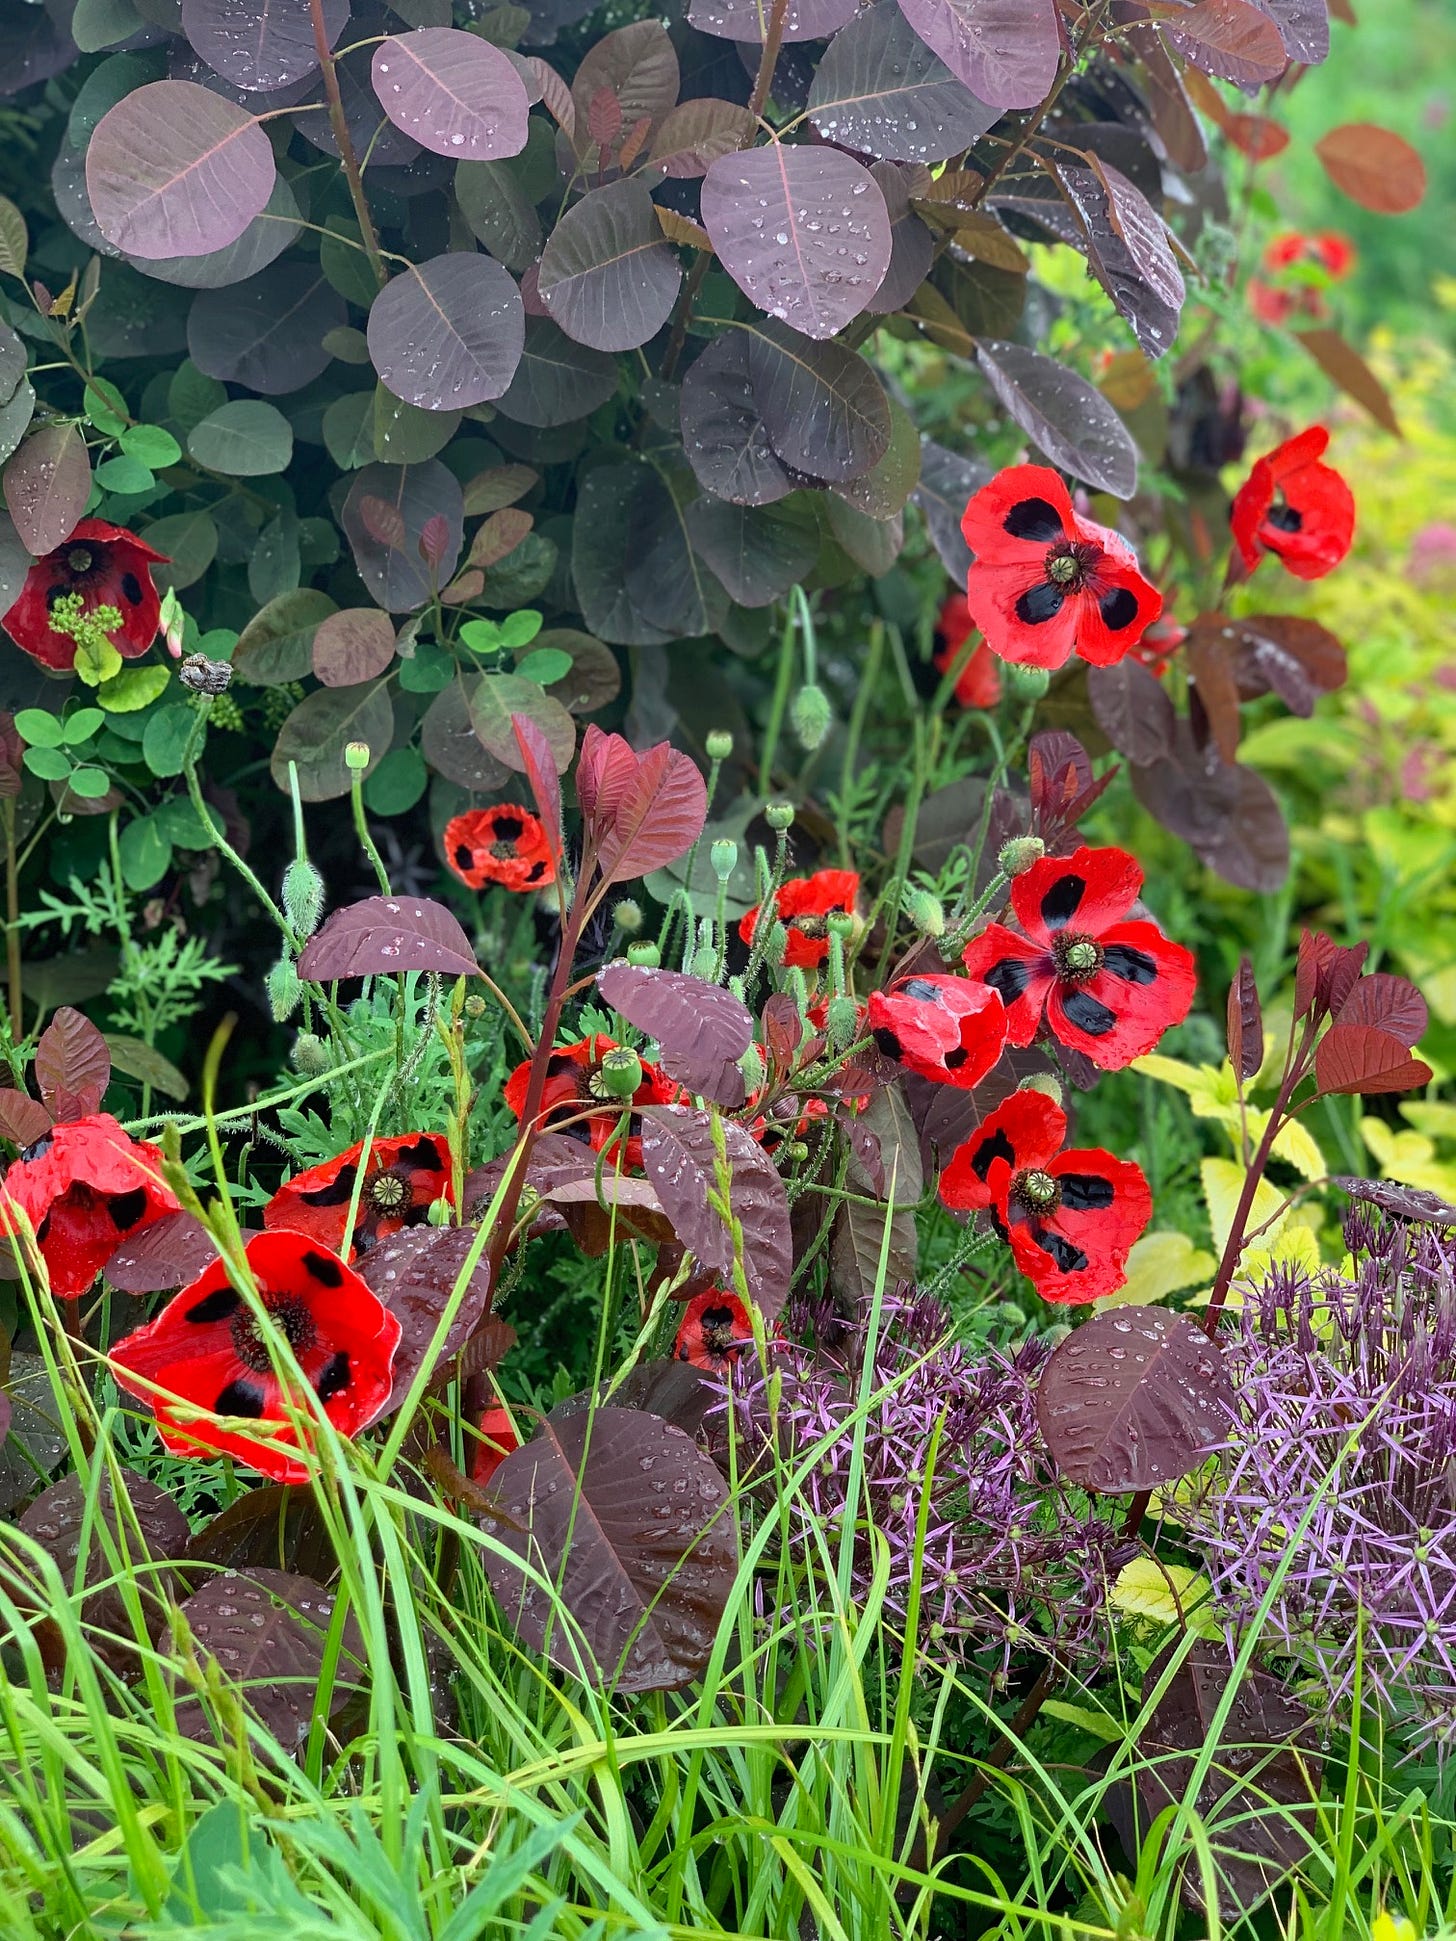 Cotinus, Ladybird poppies, and Allium christophii at Great Dixter. Photo by Marcella Hawley